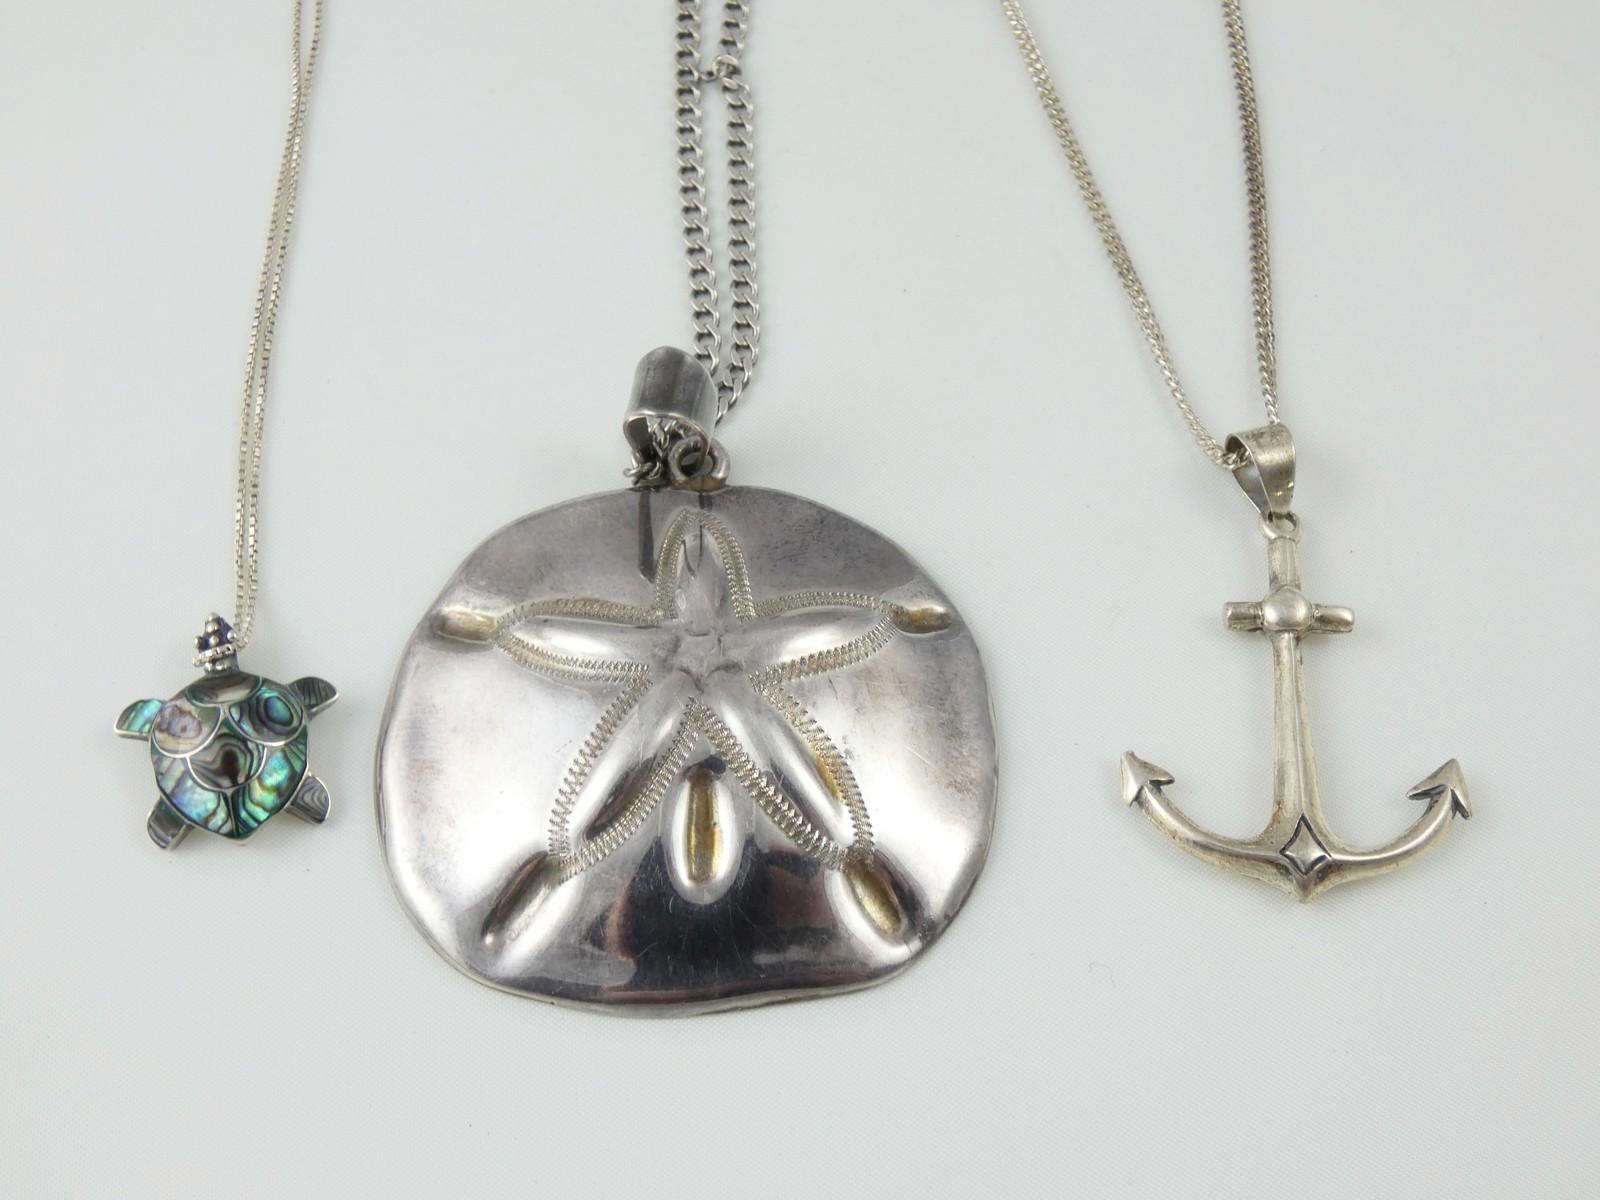 3 STERLING PENDANT NECKLACES